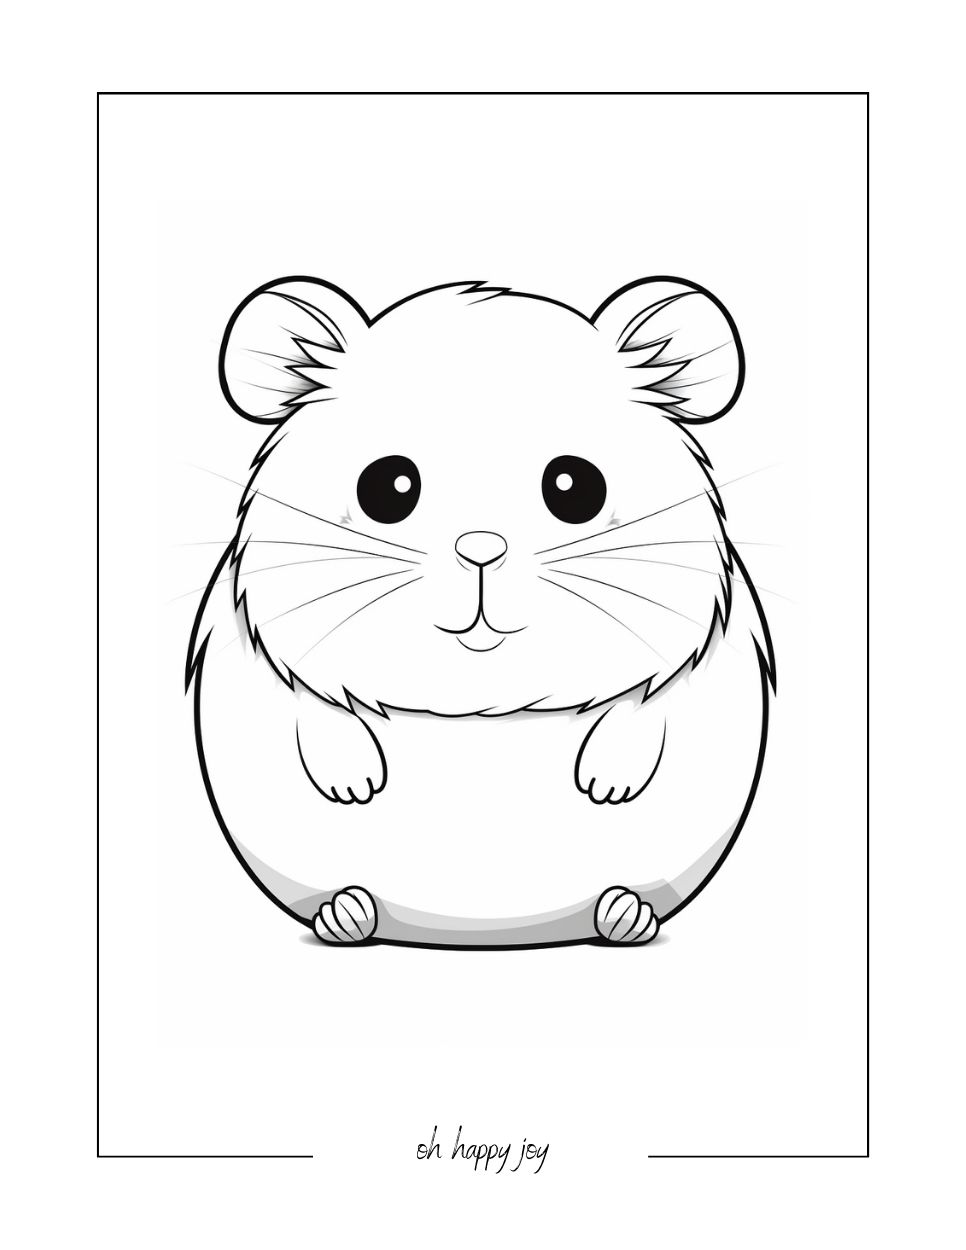 Big squishmallow coloring page